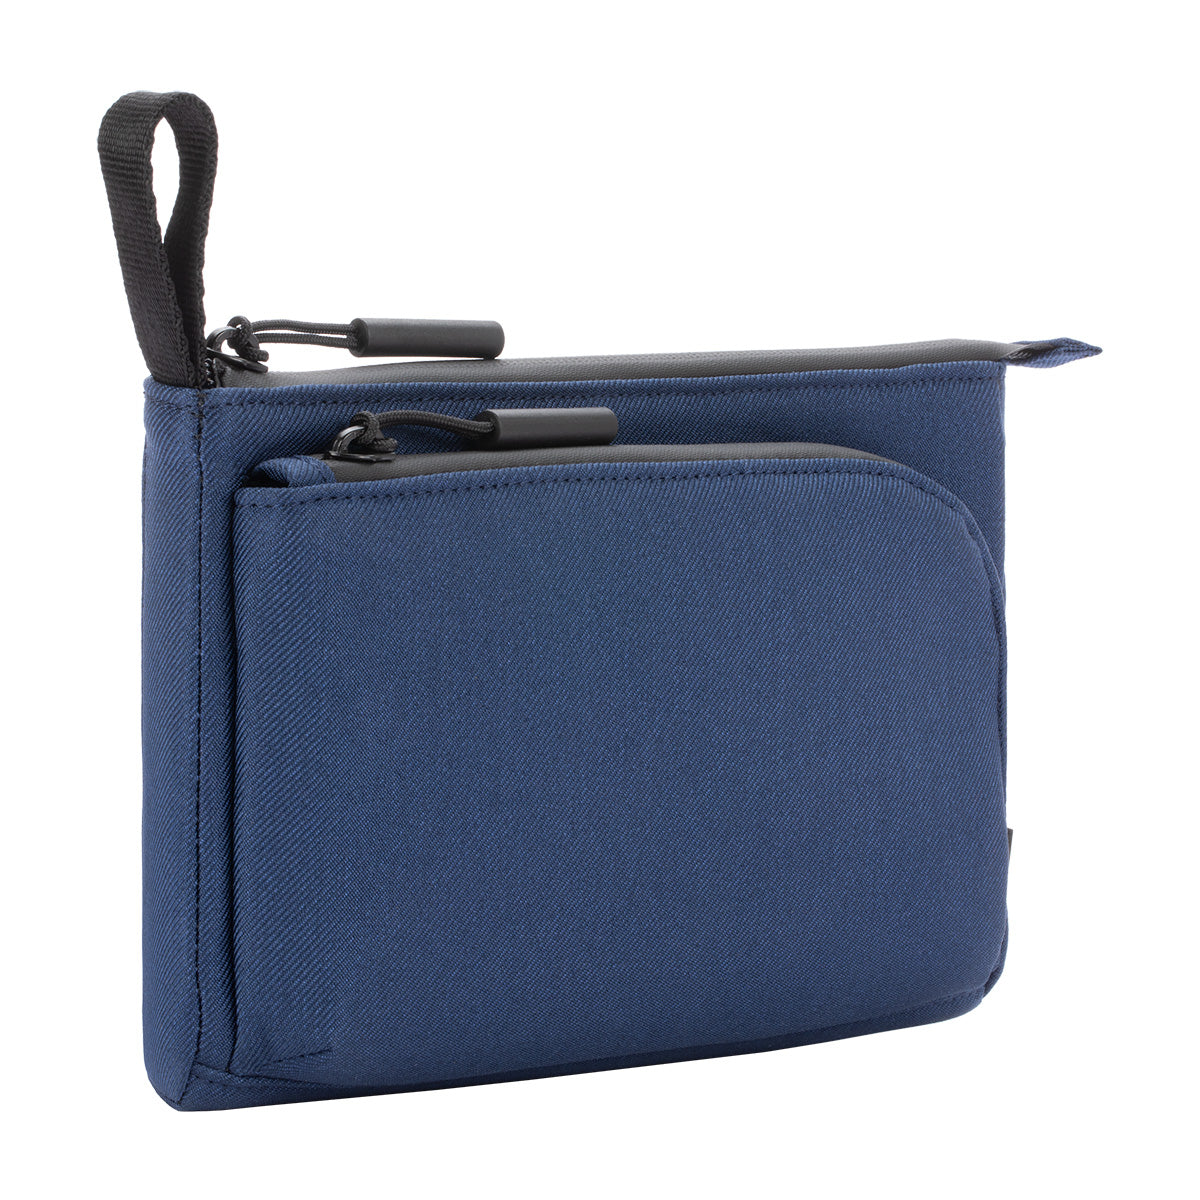 Navy | Facet Accessory Organizer in Recycled Twill - Navy